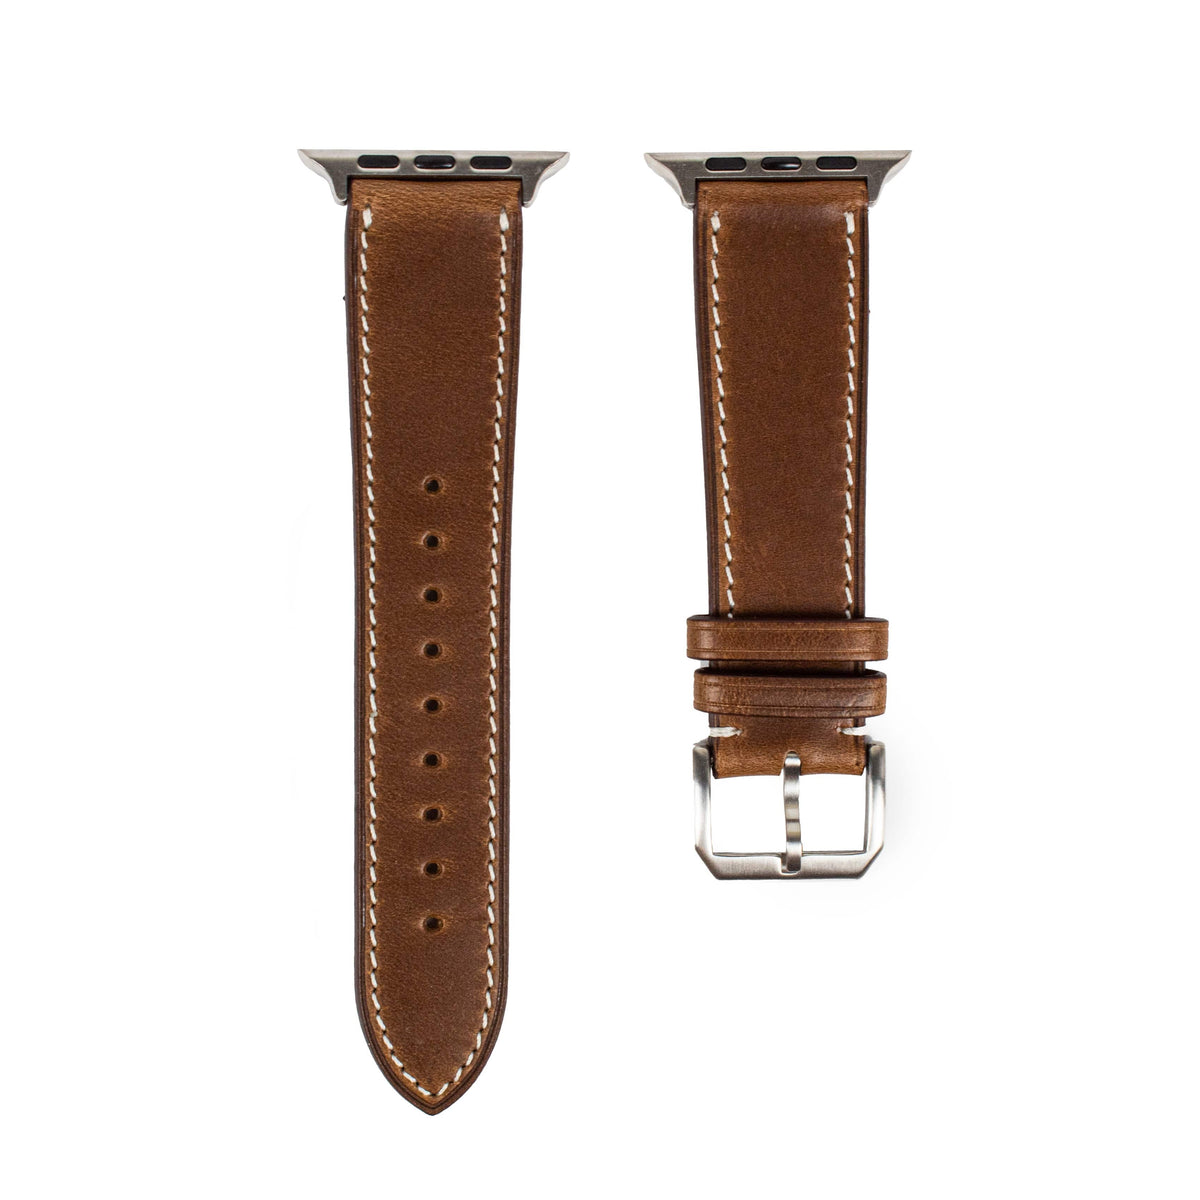 Horween Cowhide Leather Strap